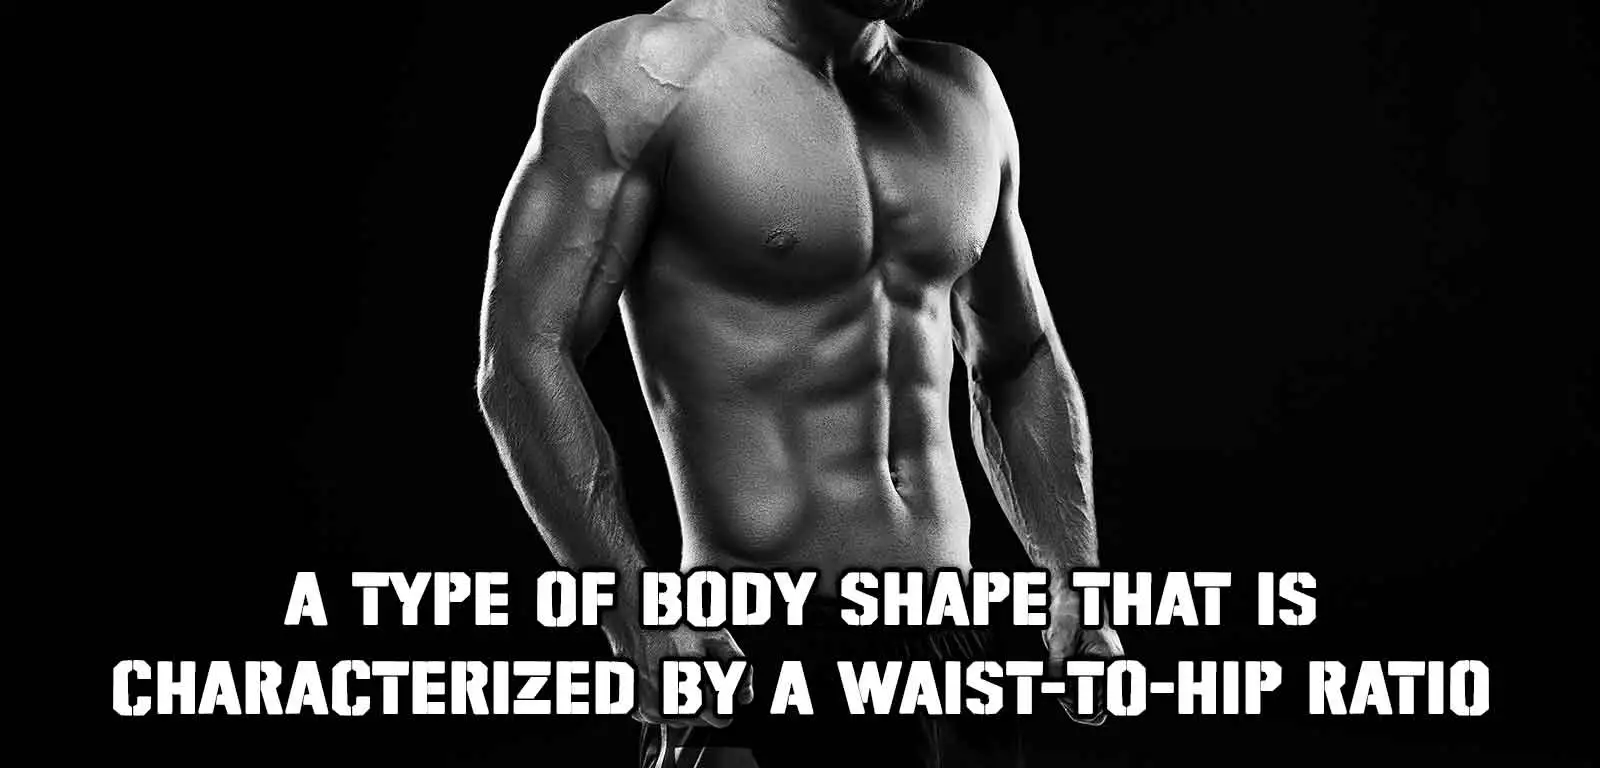 The body types that typically have a strong, muscular build.